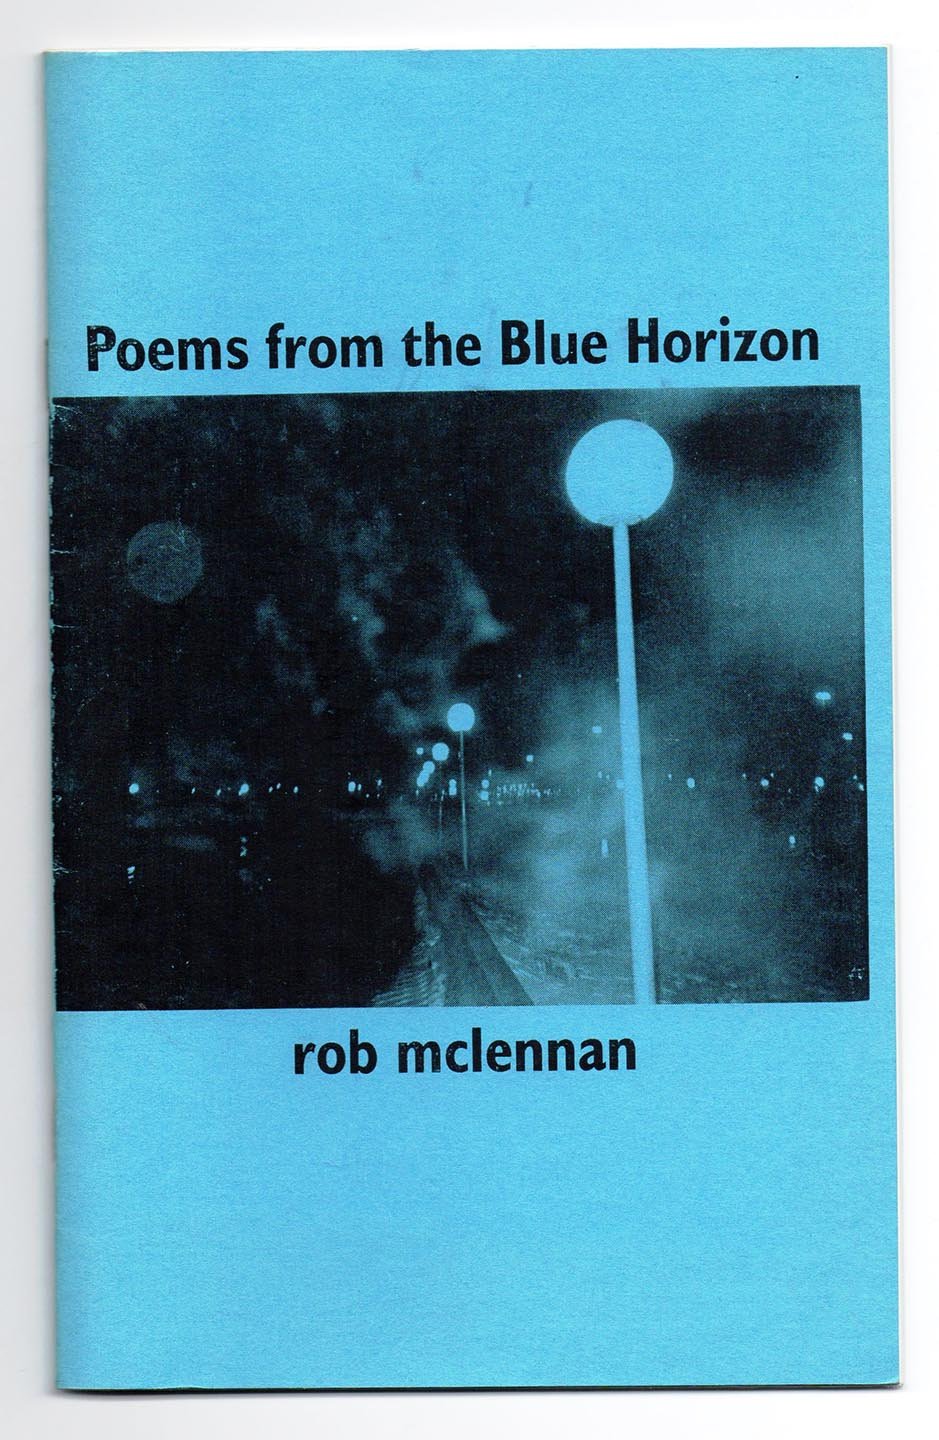 Poems from the Blue Horizon